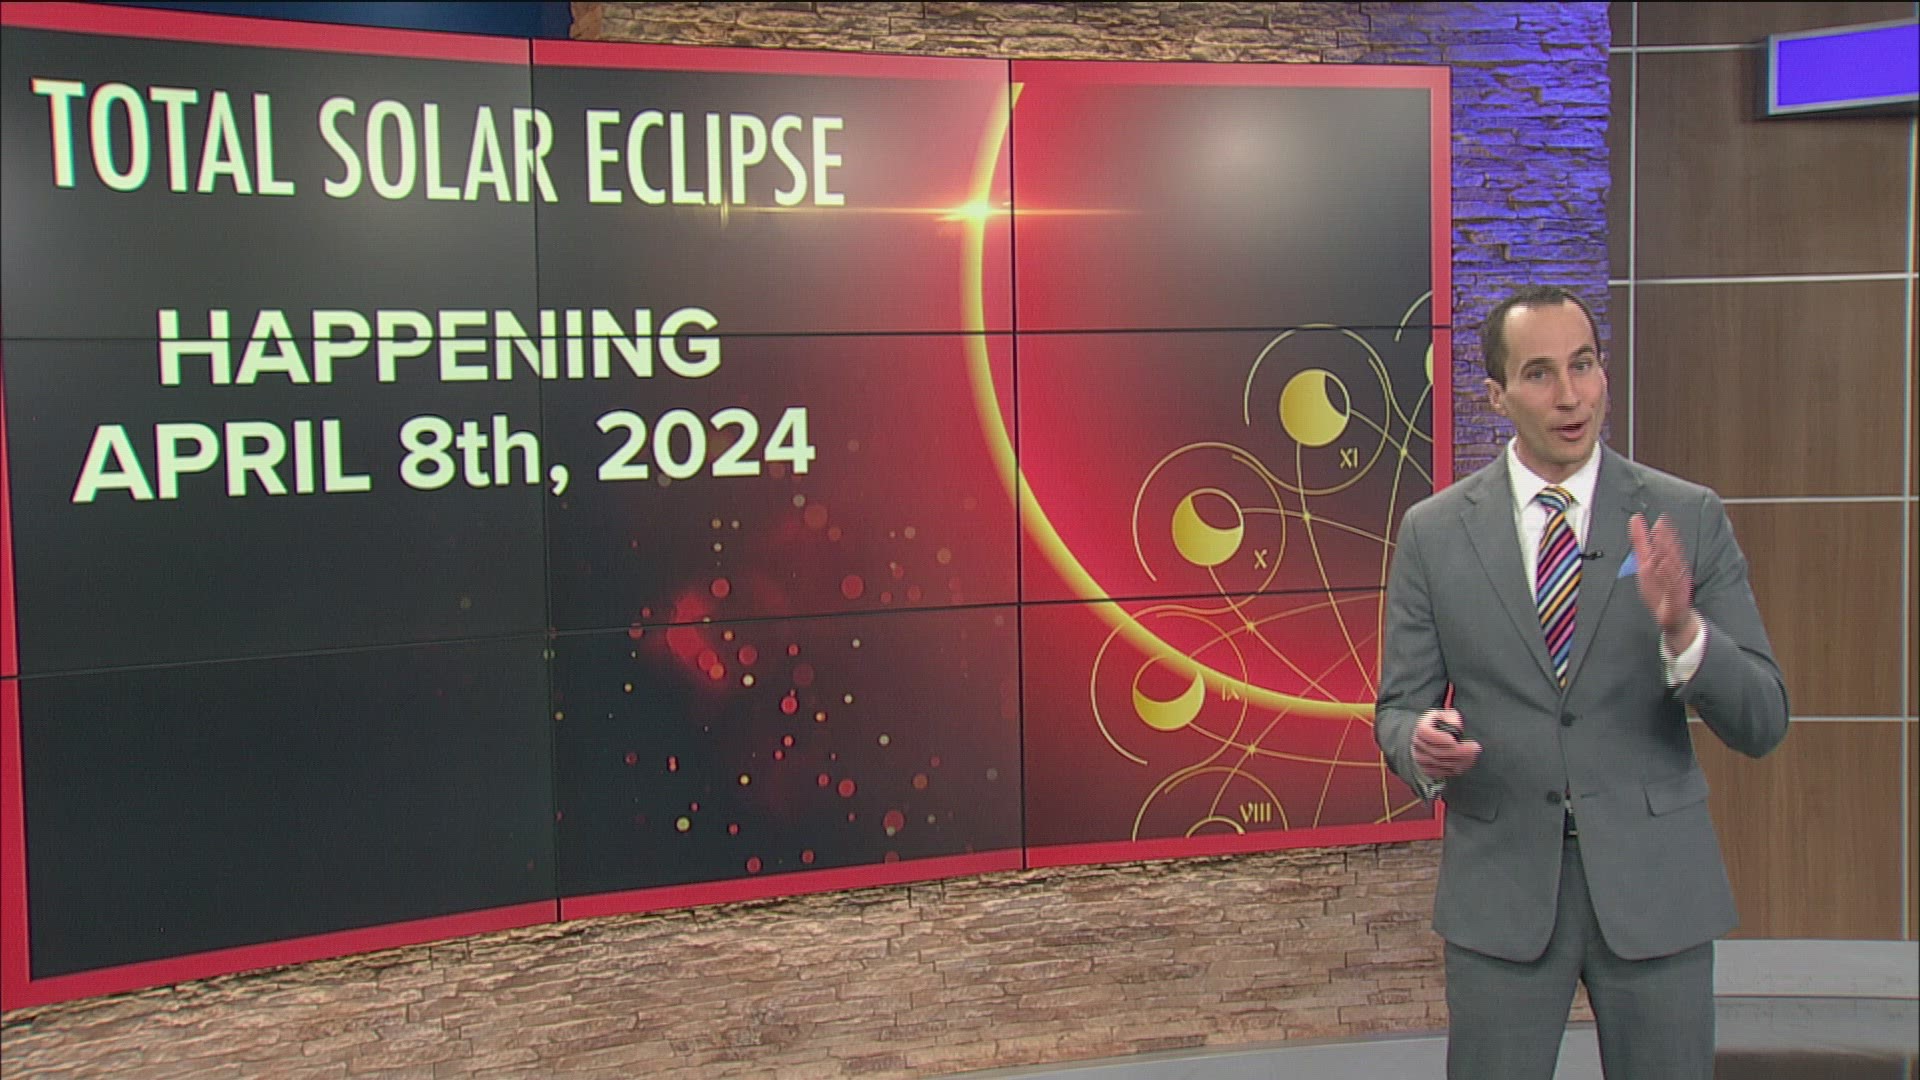 WTOL 11 Chief Meteorologist Chris Vickers breaks down what a total solar eclipse means and how it happens astronomically.